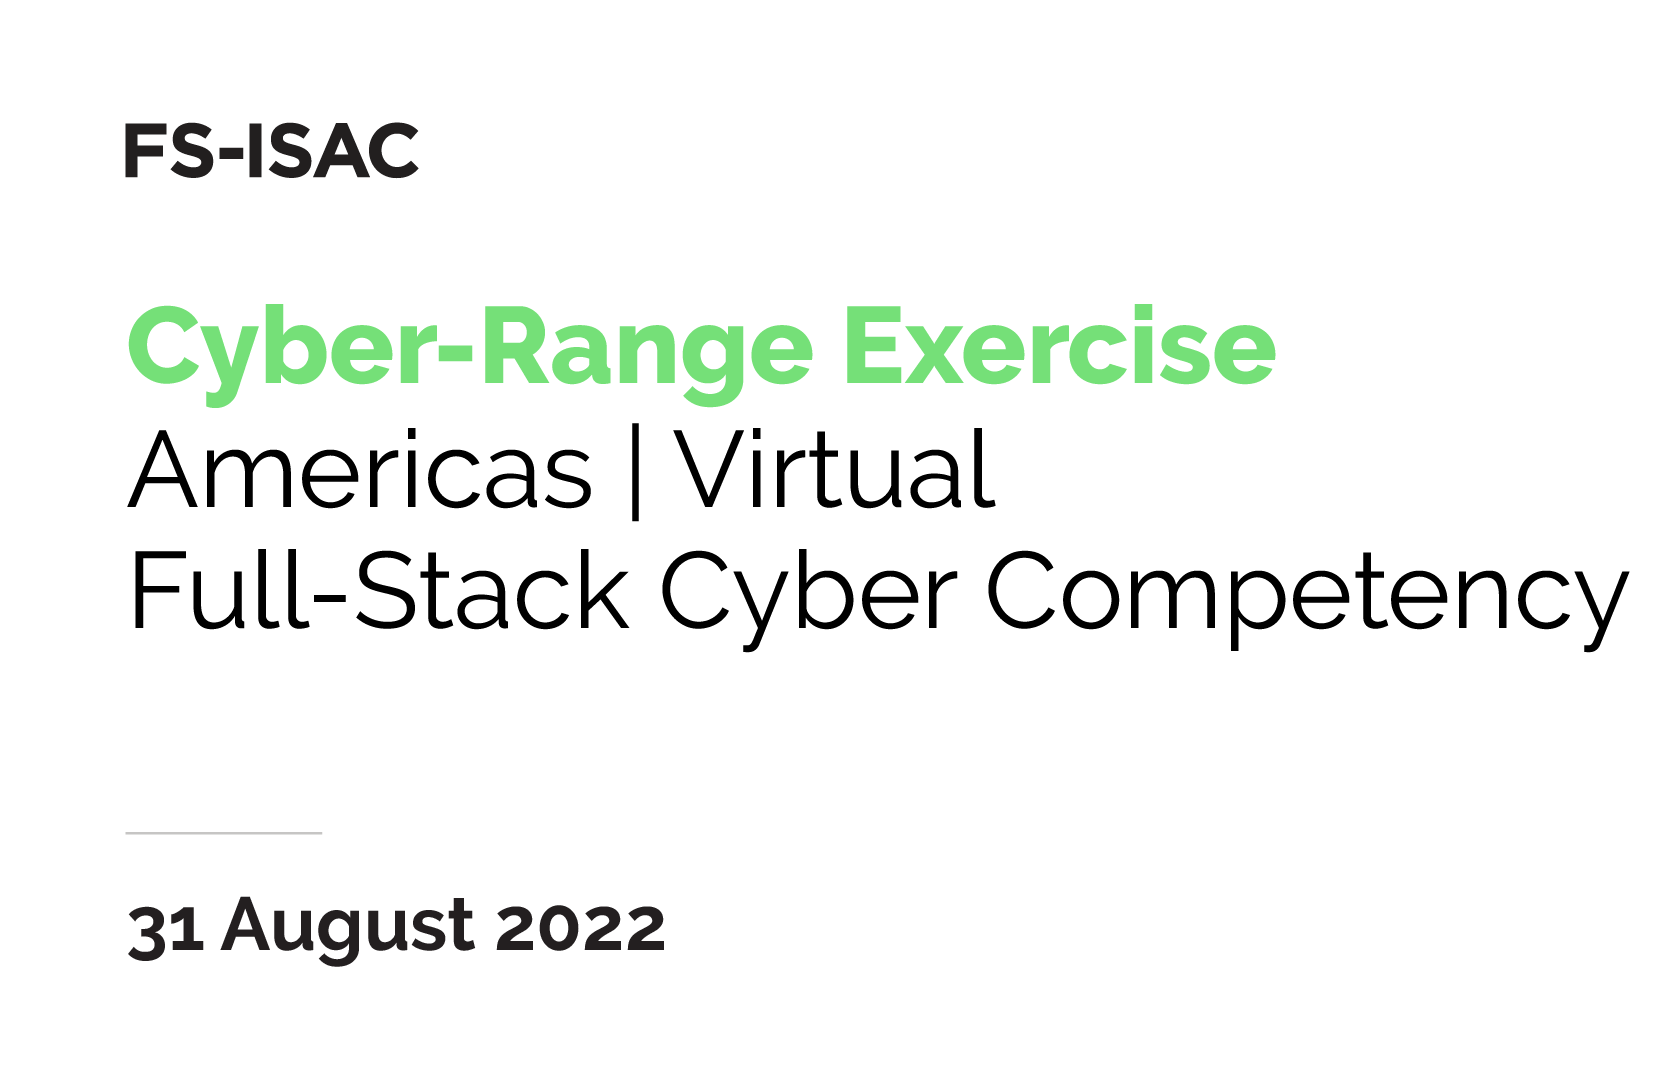 FS-ISAC Cyber Range Exercise | Full-Stack Americas | August 2022